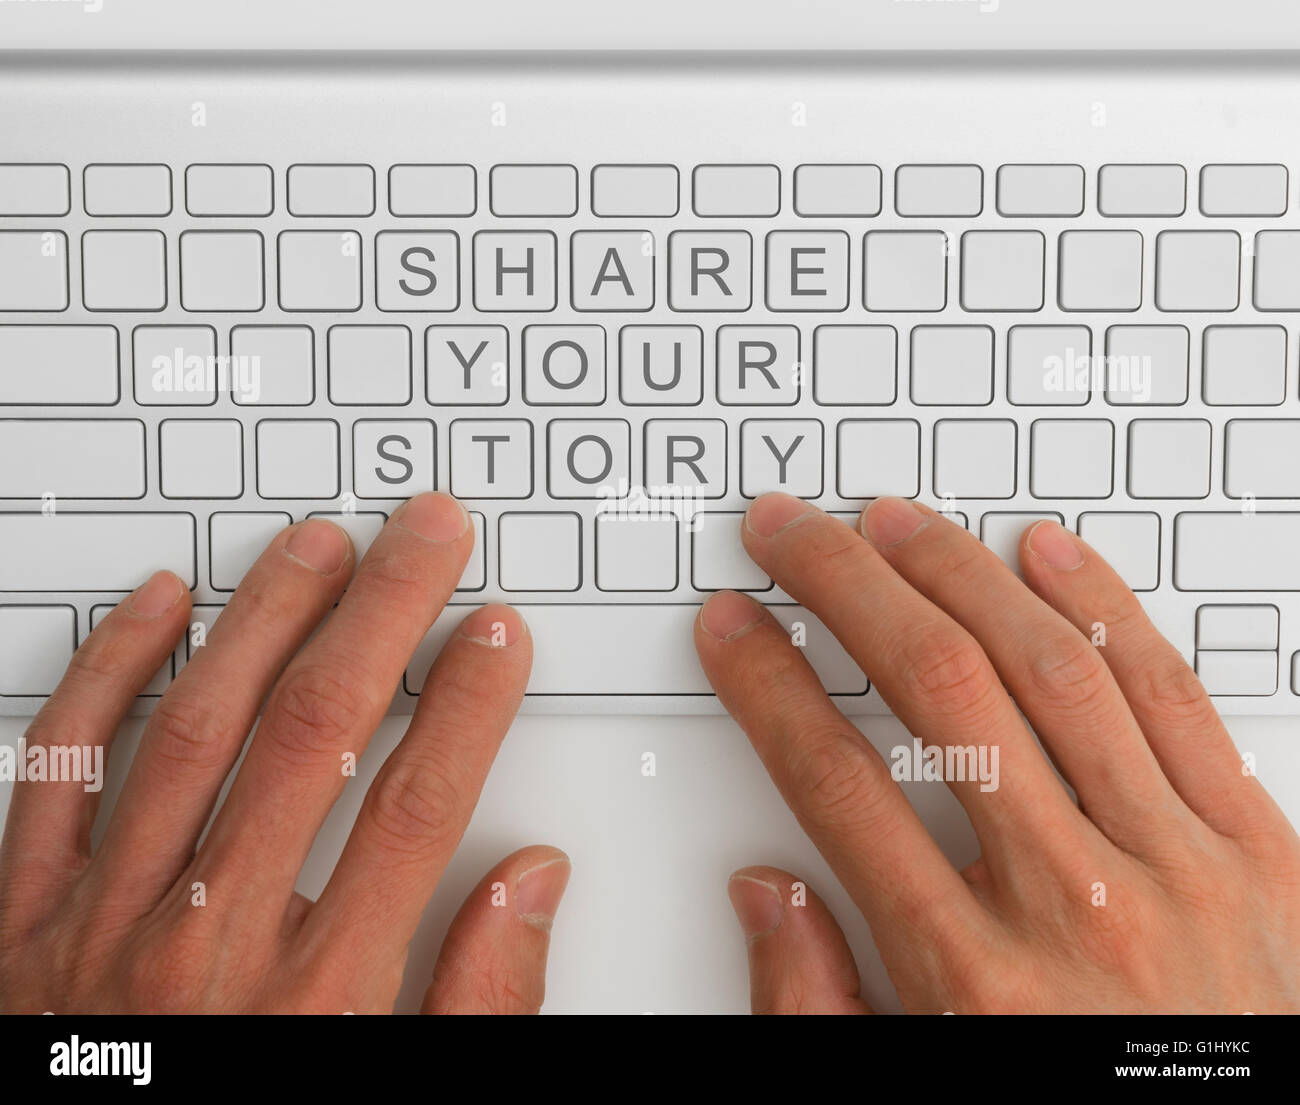 Share your story concept Stock Photo